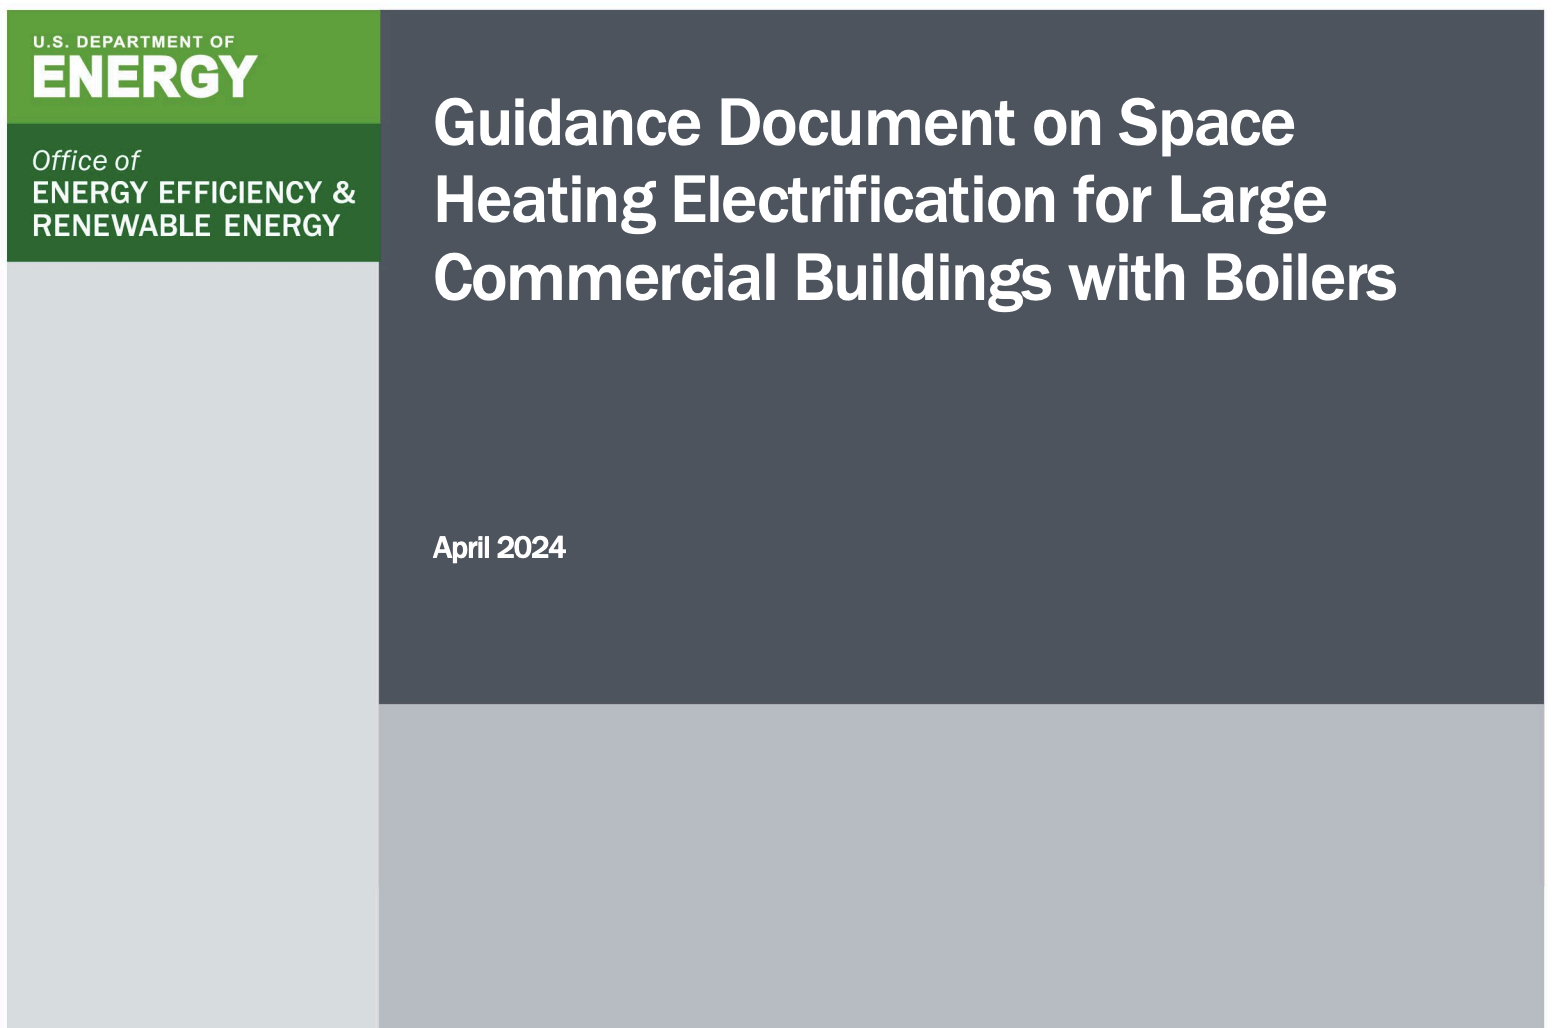 Guide on electrifying space heating for large commercial buildings with boilers released